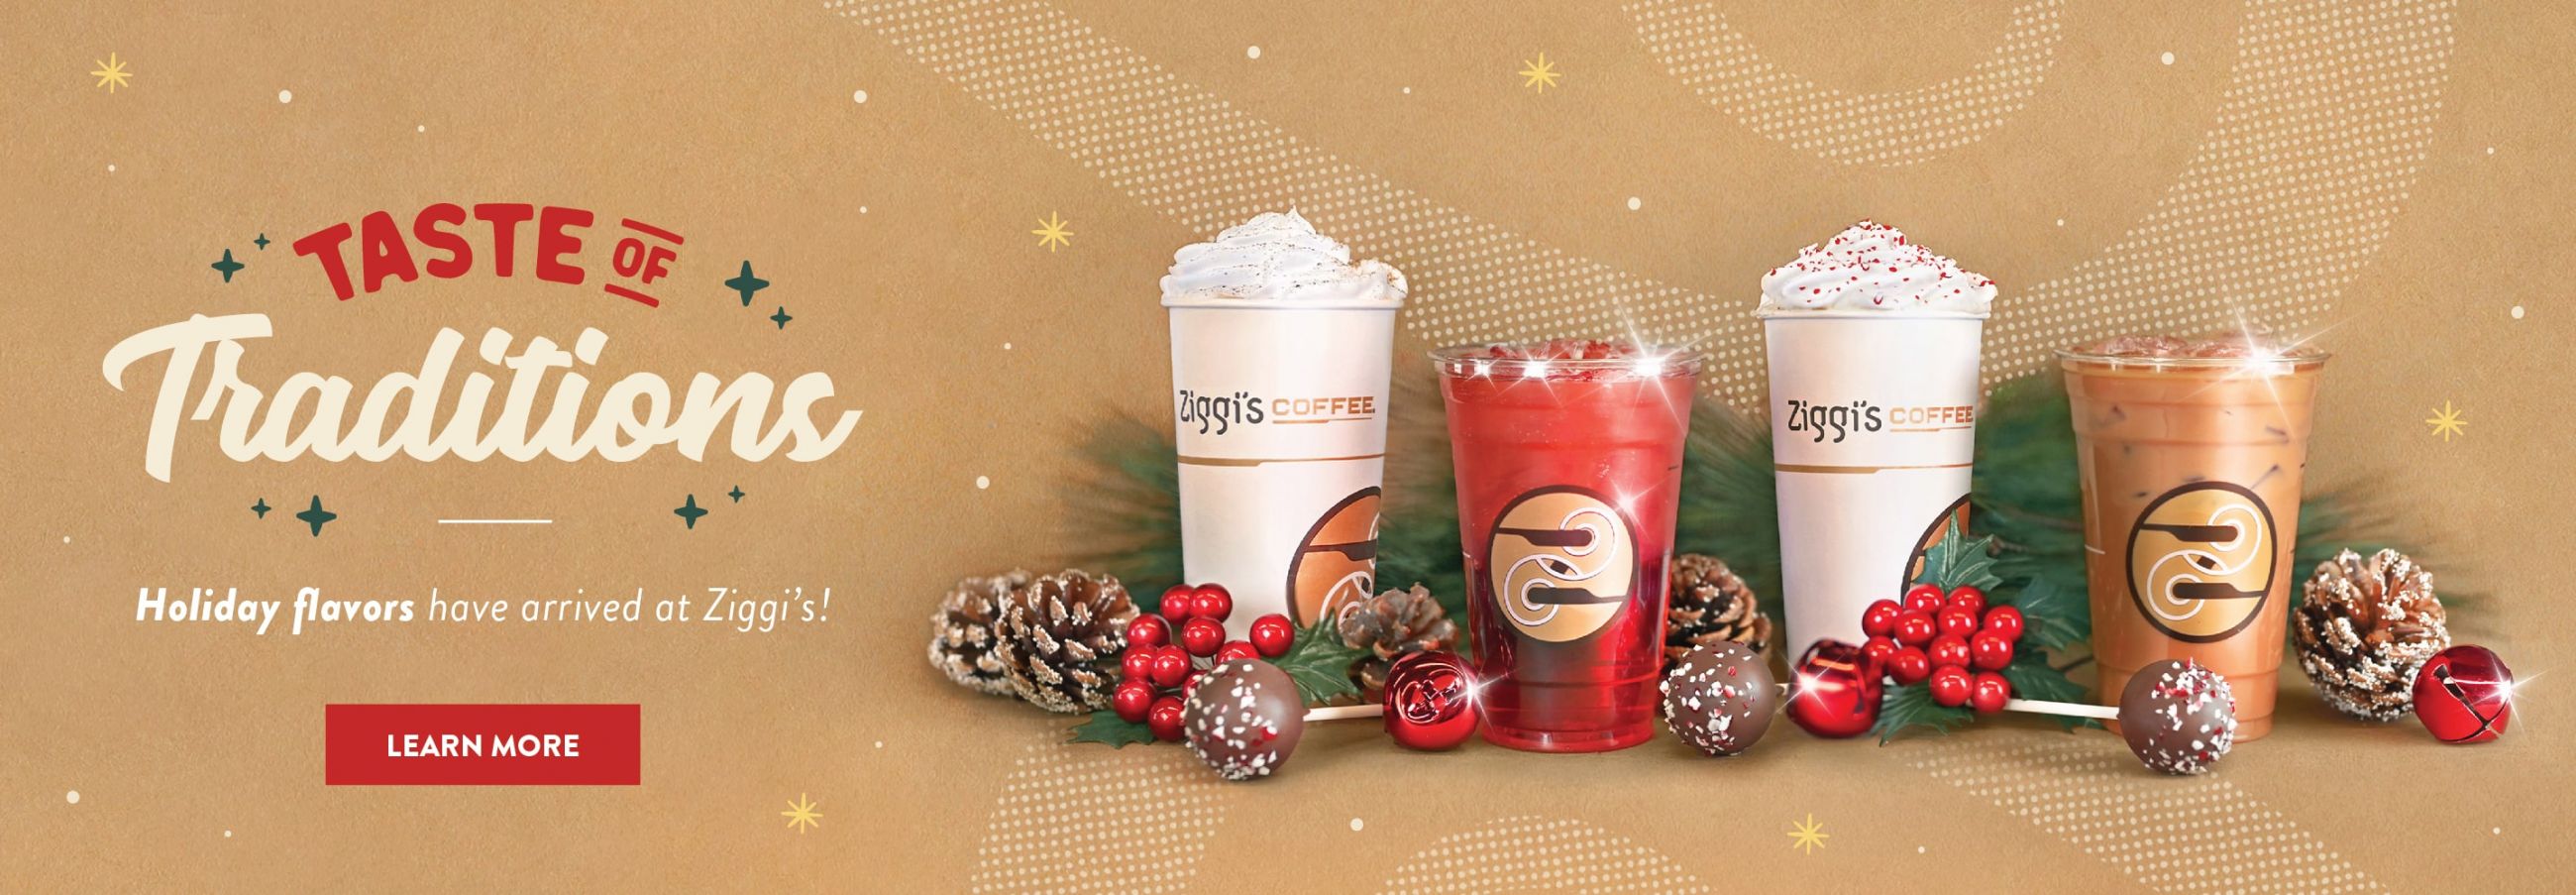 Photo of Ziggi's holiday drinks with a headline that reads Taste of Traditions. The drinks sitting among a festive holiday scene include the Candy Cane Crunch, Eggnog Latte, Mistletoe Latte, Yuletide Infusion.